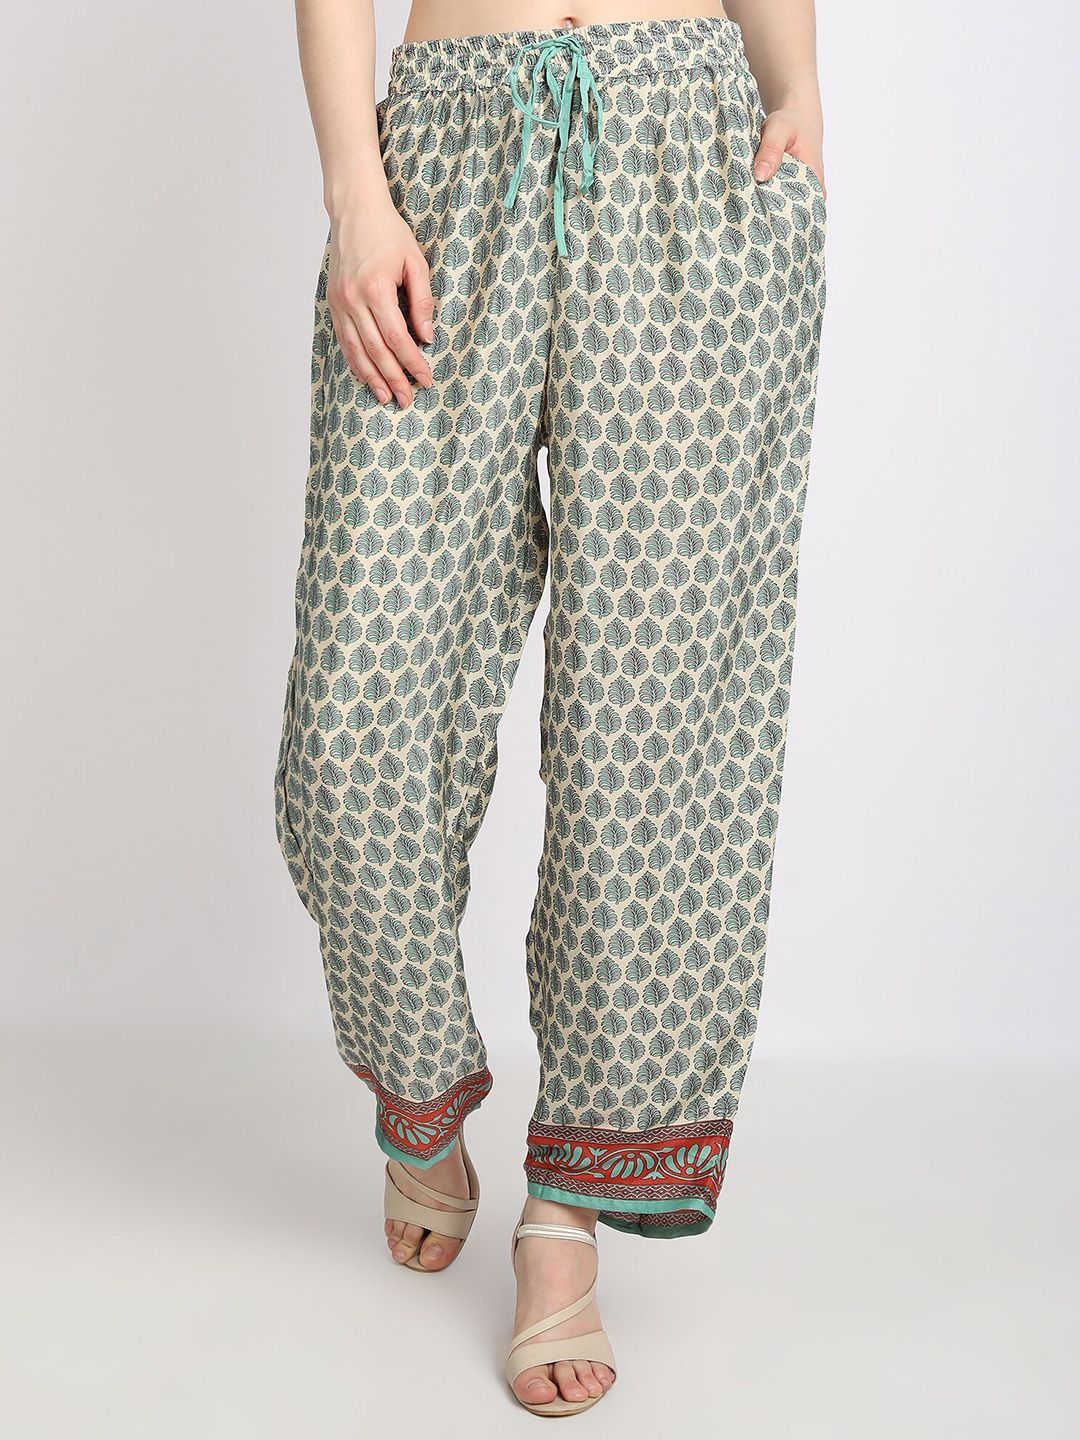 HOUSE OF KARI Women Green & Cream-Coloured Floral Printed Ethnic Palazzos Price in India